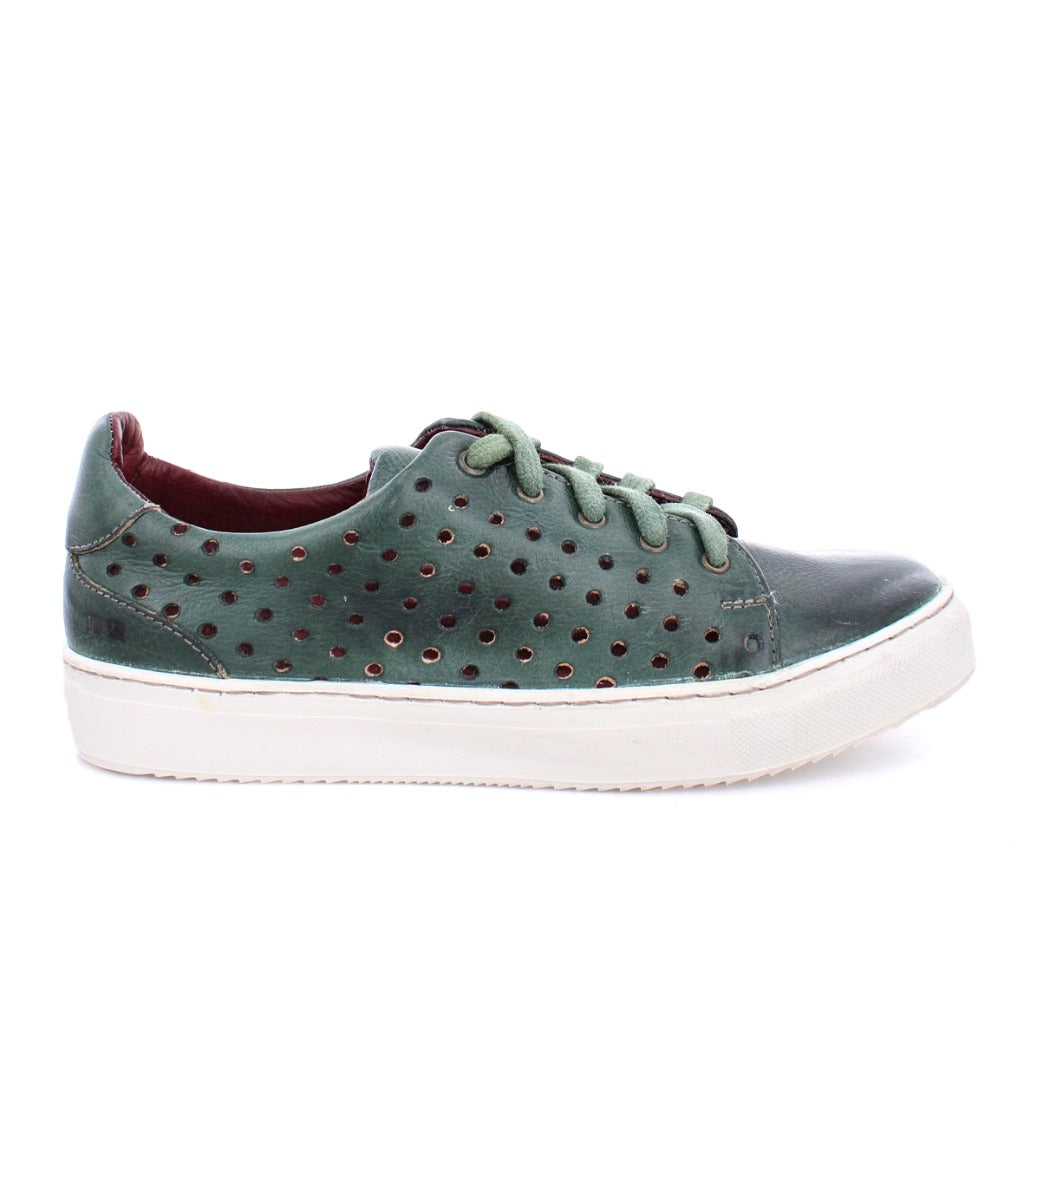 A women's green leather Lyne sneaker with perforations by Bed Stu.